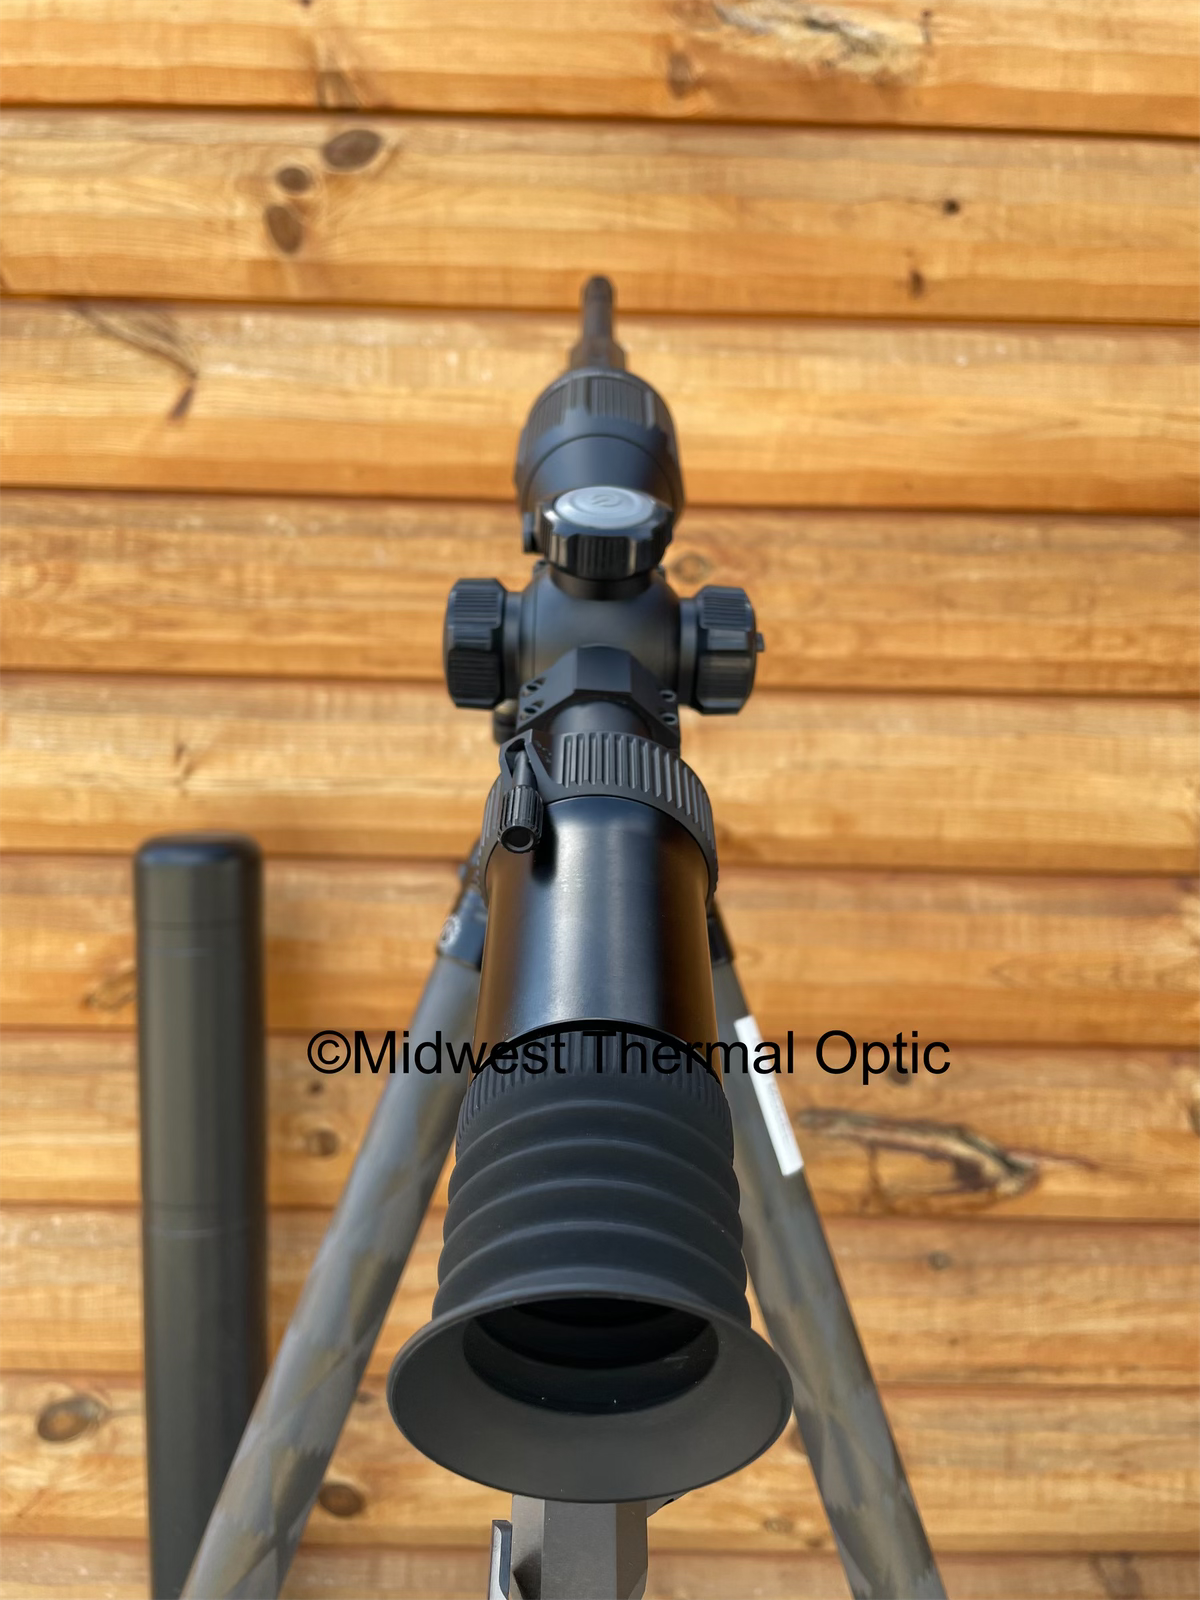 back view of thermal scope